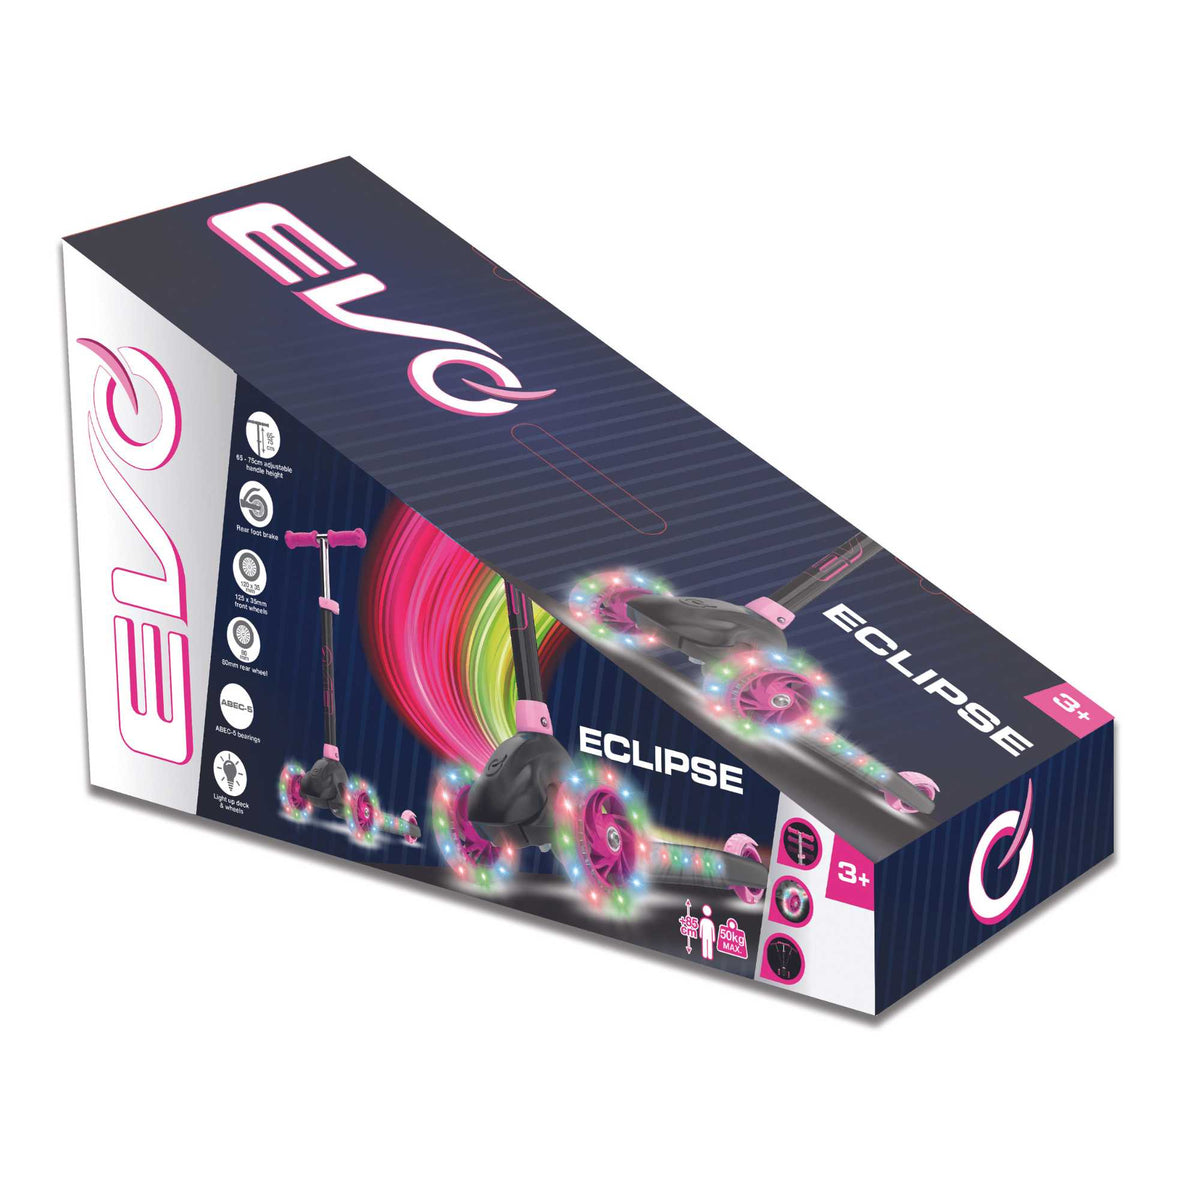 EVO Eclipse Light Up Scooter - Pink